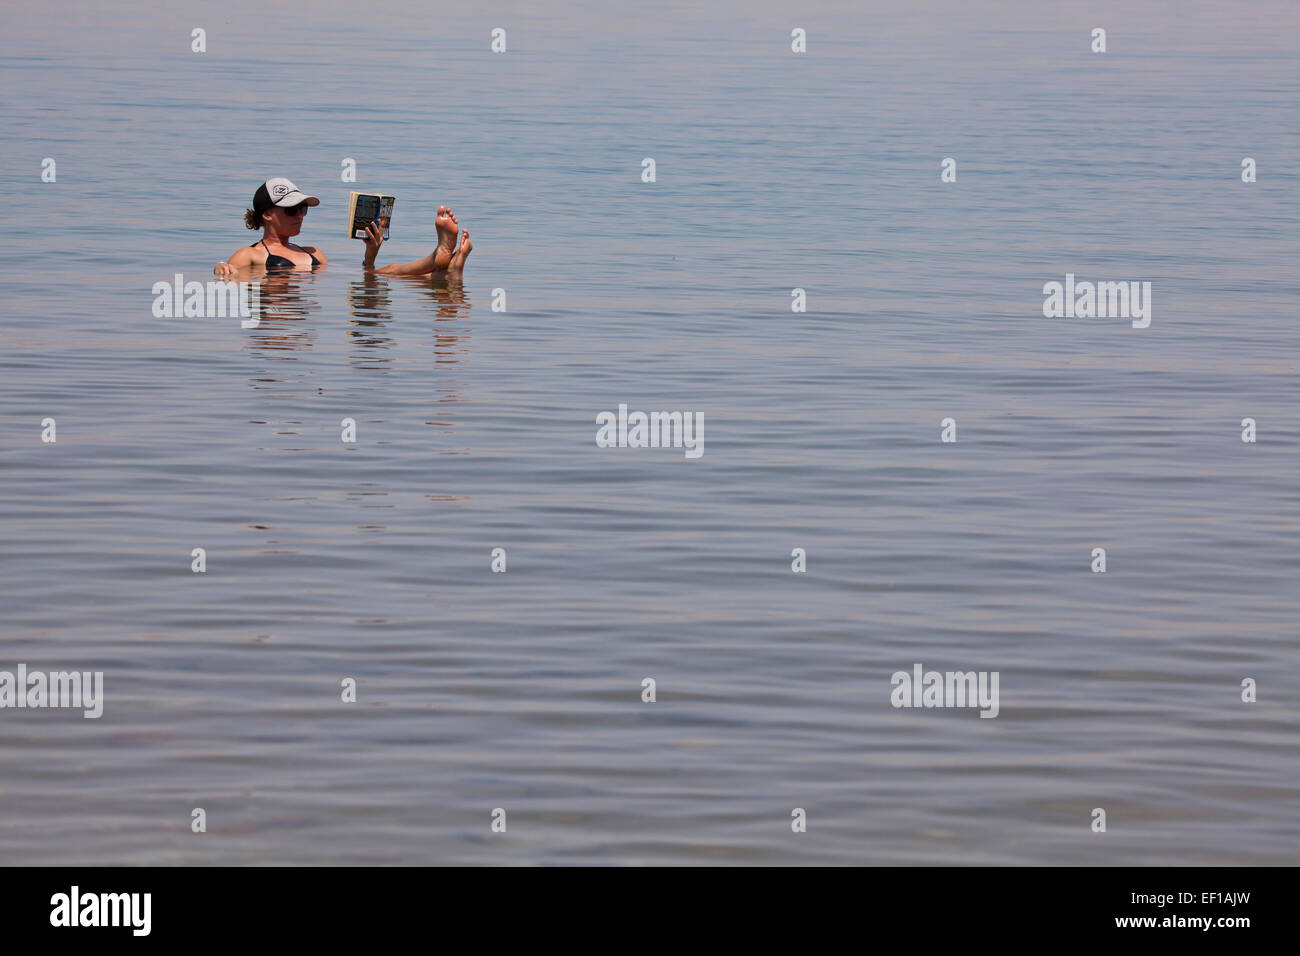 Relaxing in the dead sea. Stock Photo